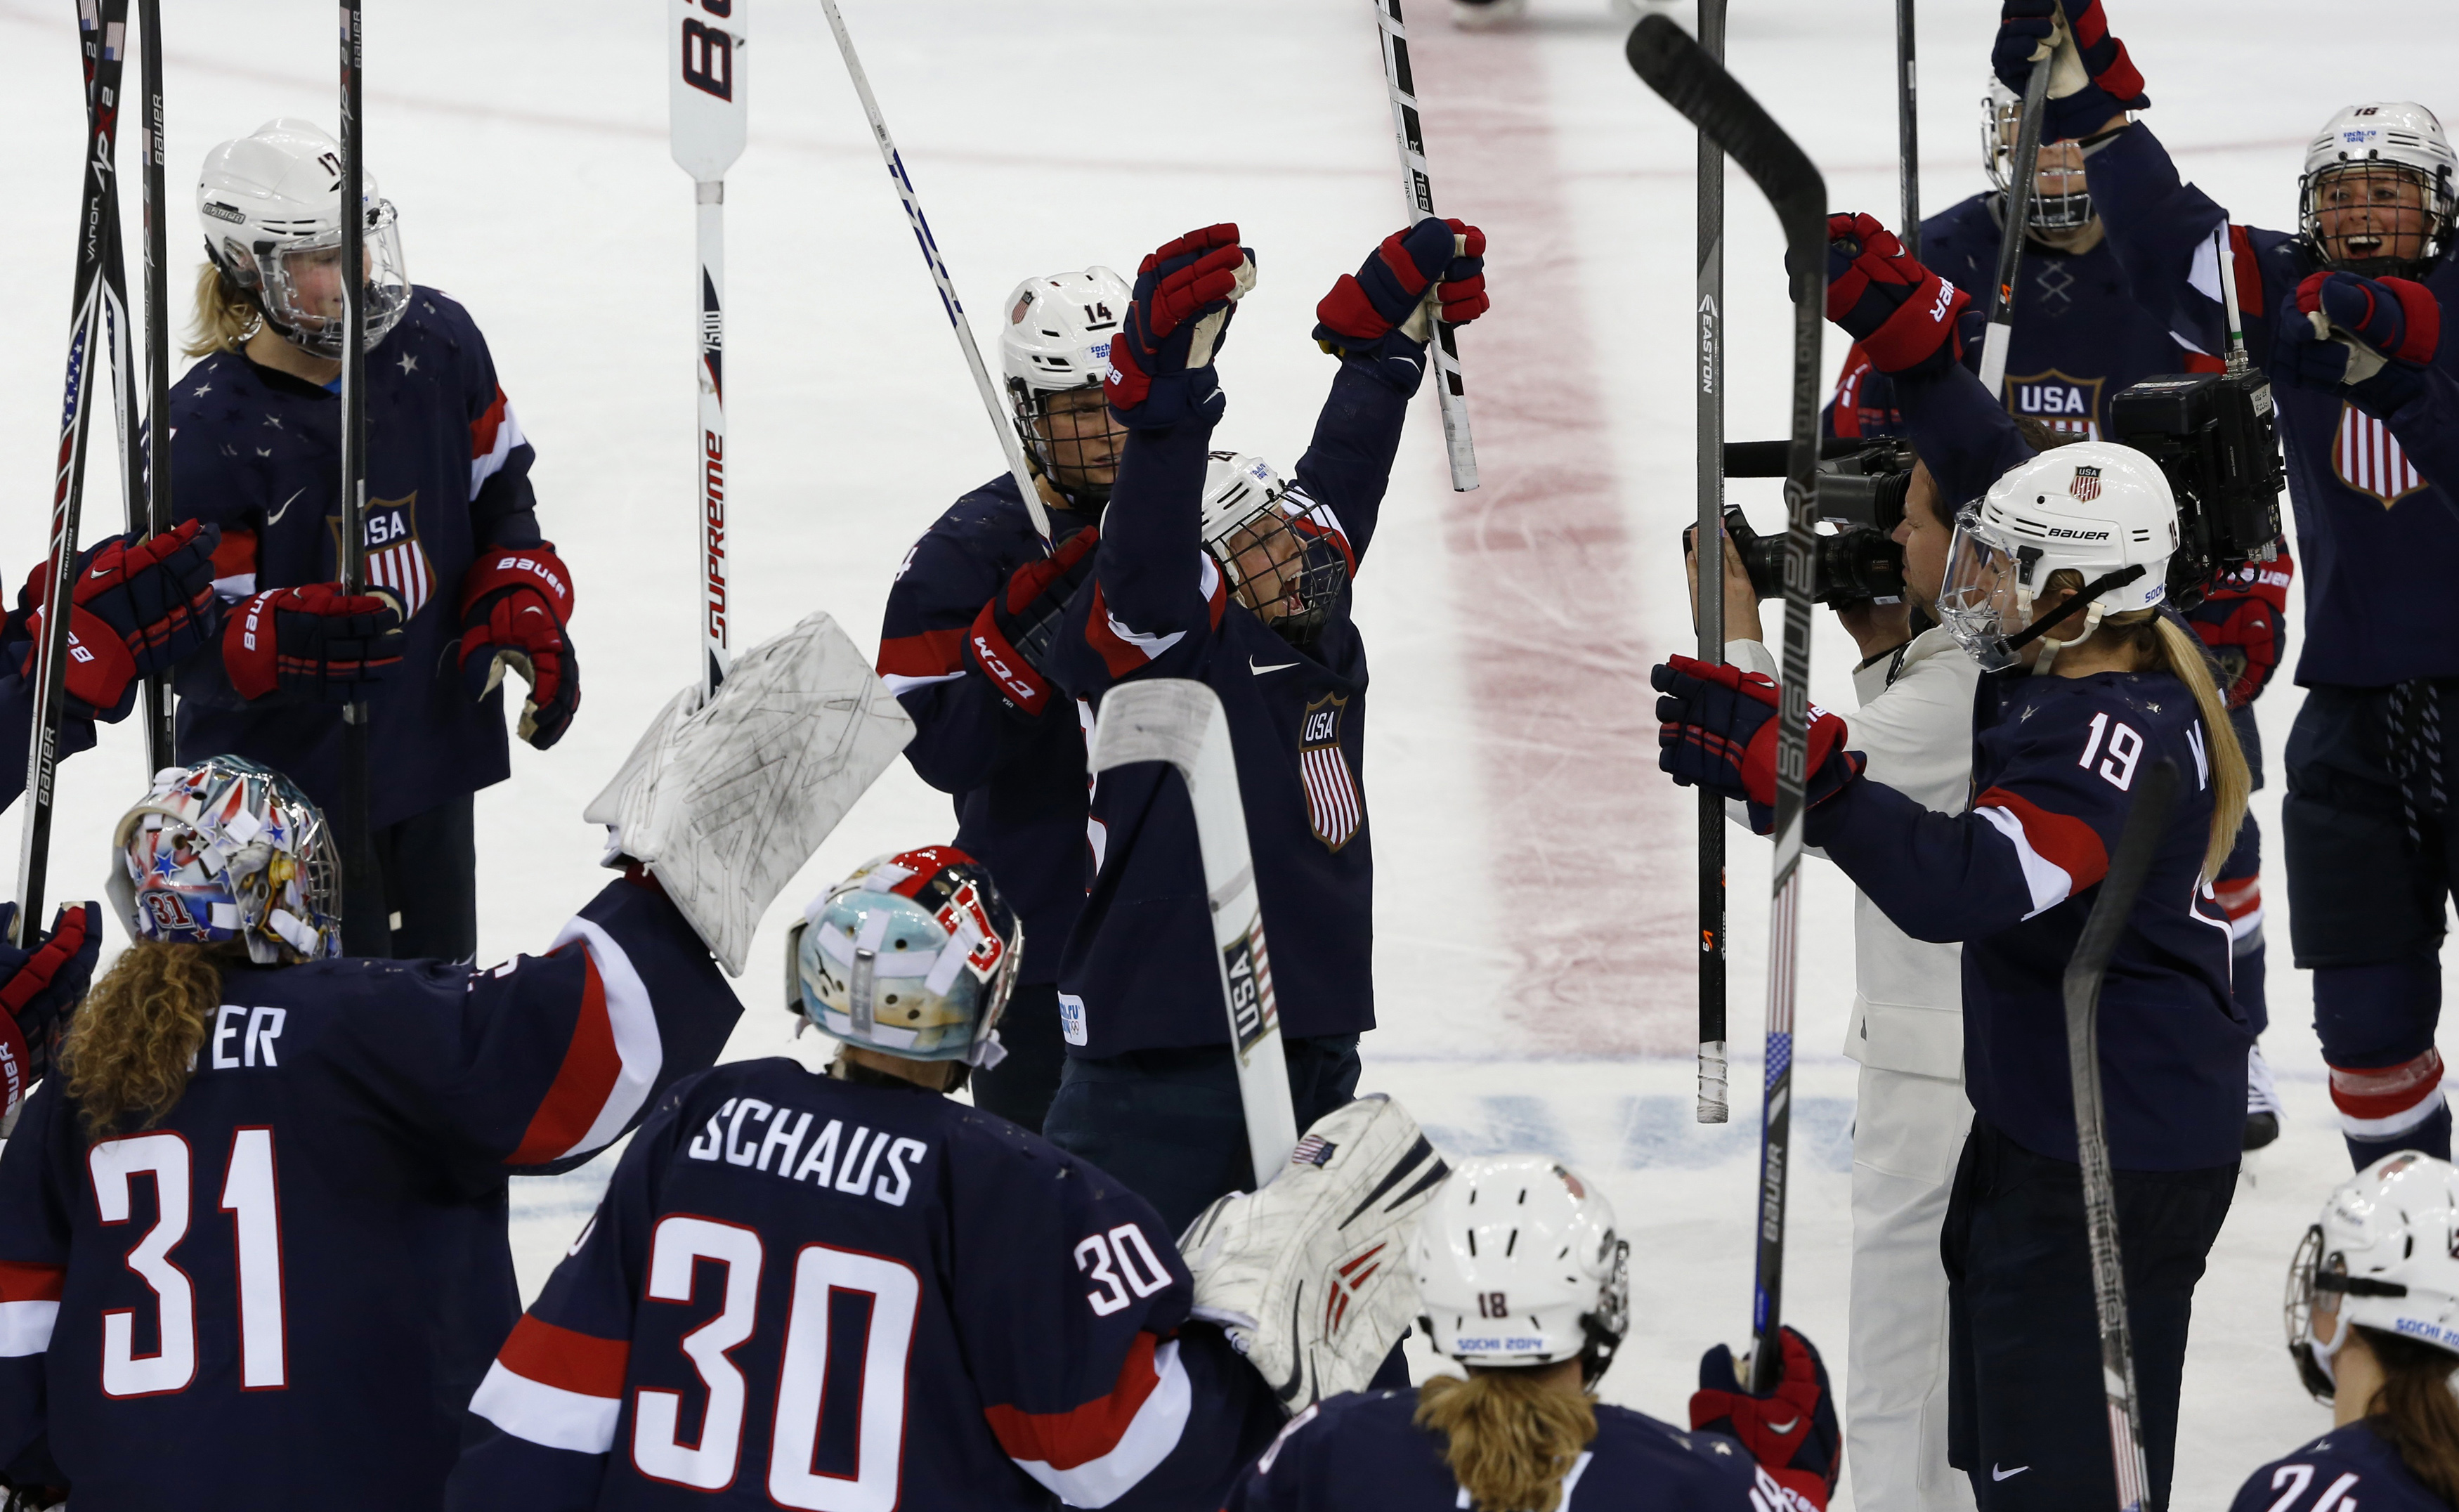 Team USA players celebrate their win over Sweden in their women's ice hockey semi-final game at the Sochi 2014 Winter Olympic Games Feb. 17, 2014.